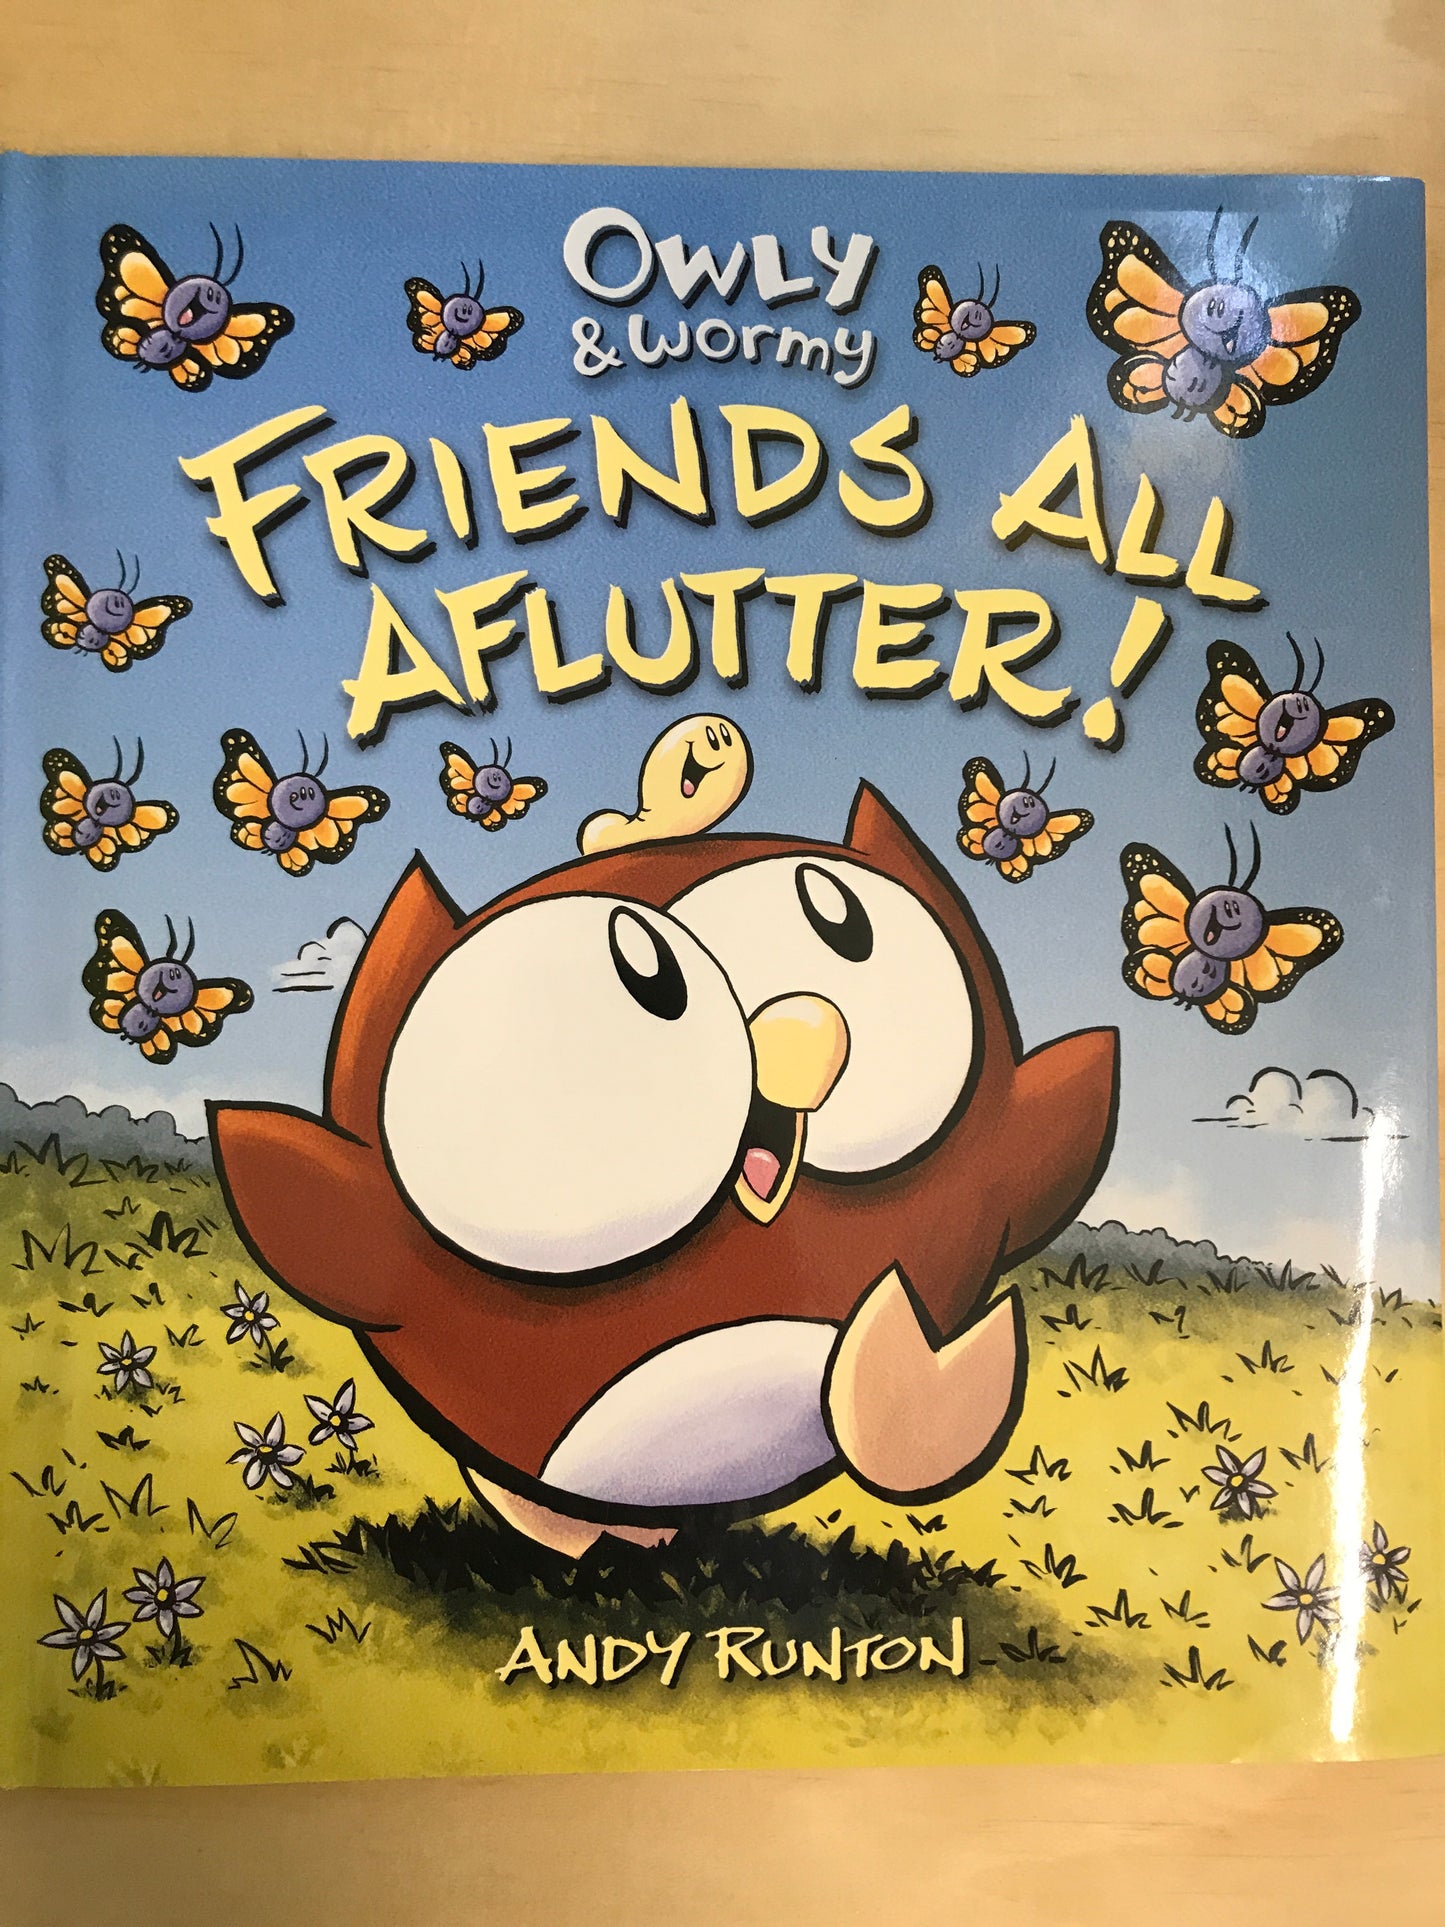 Owly & Wormy: Friends All Aflutter